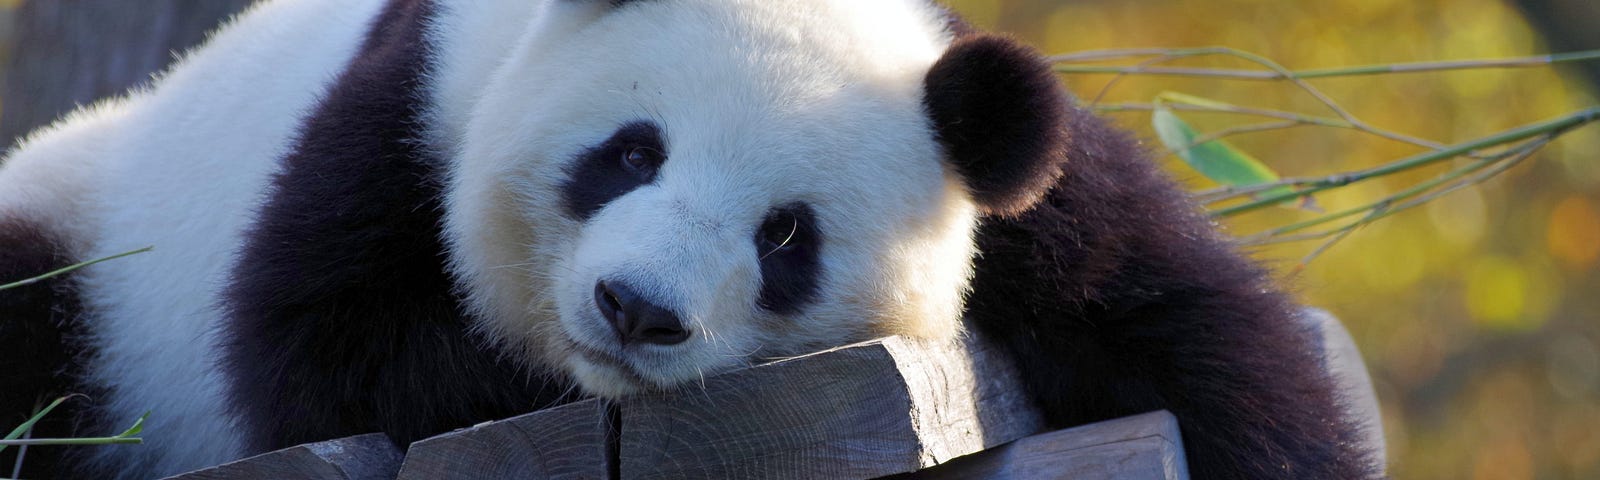 Giant panda slouched on a wooden board